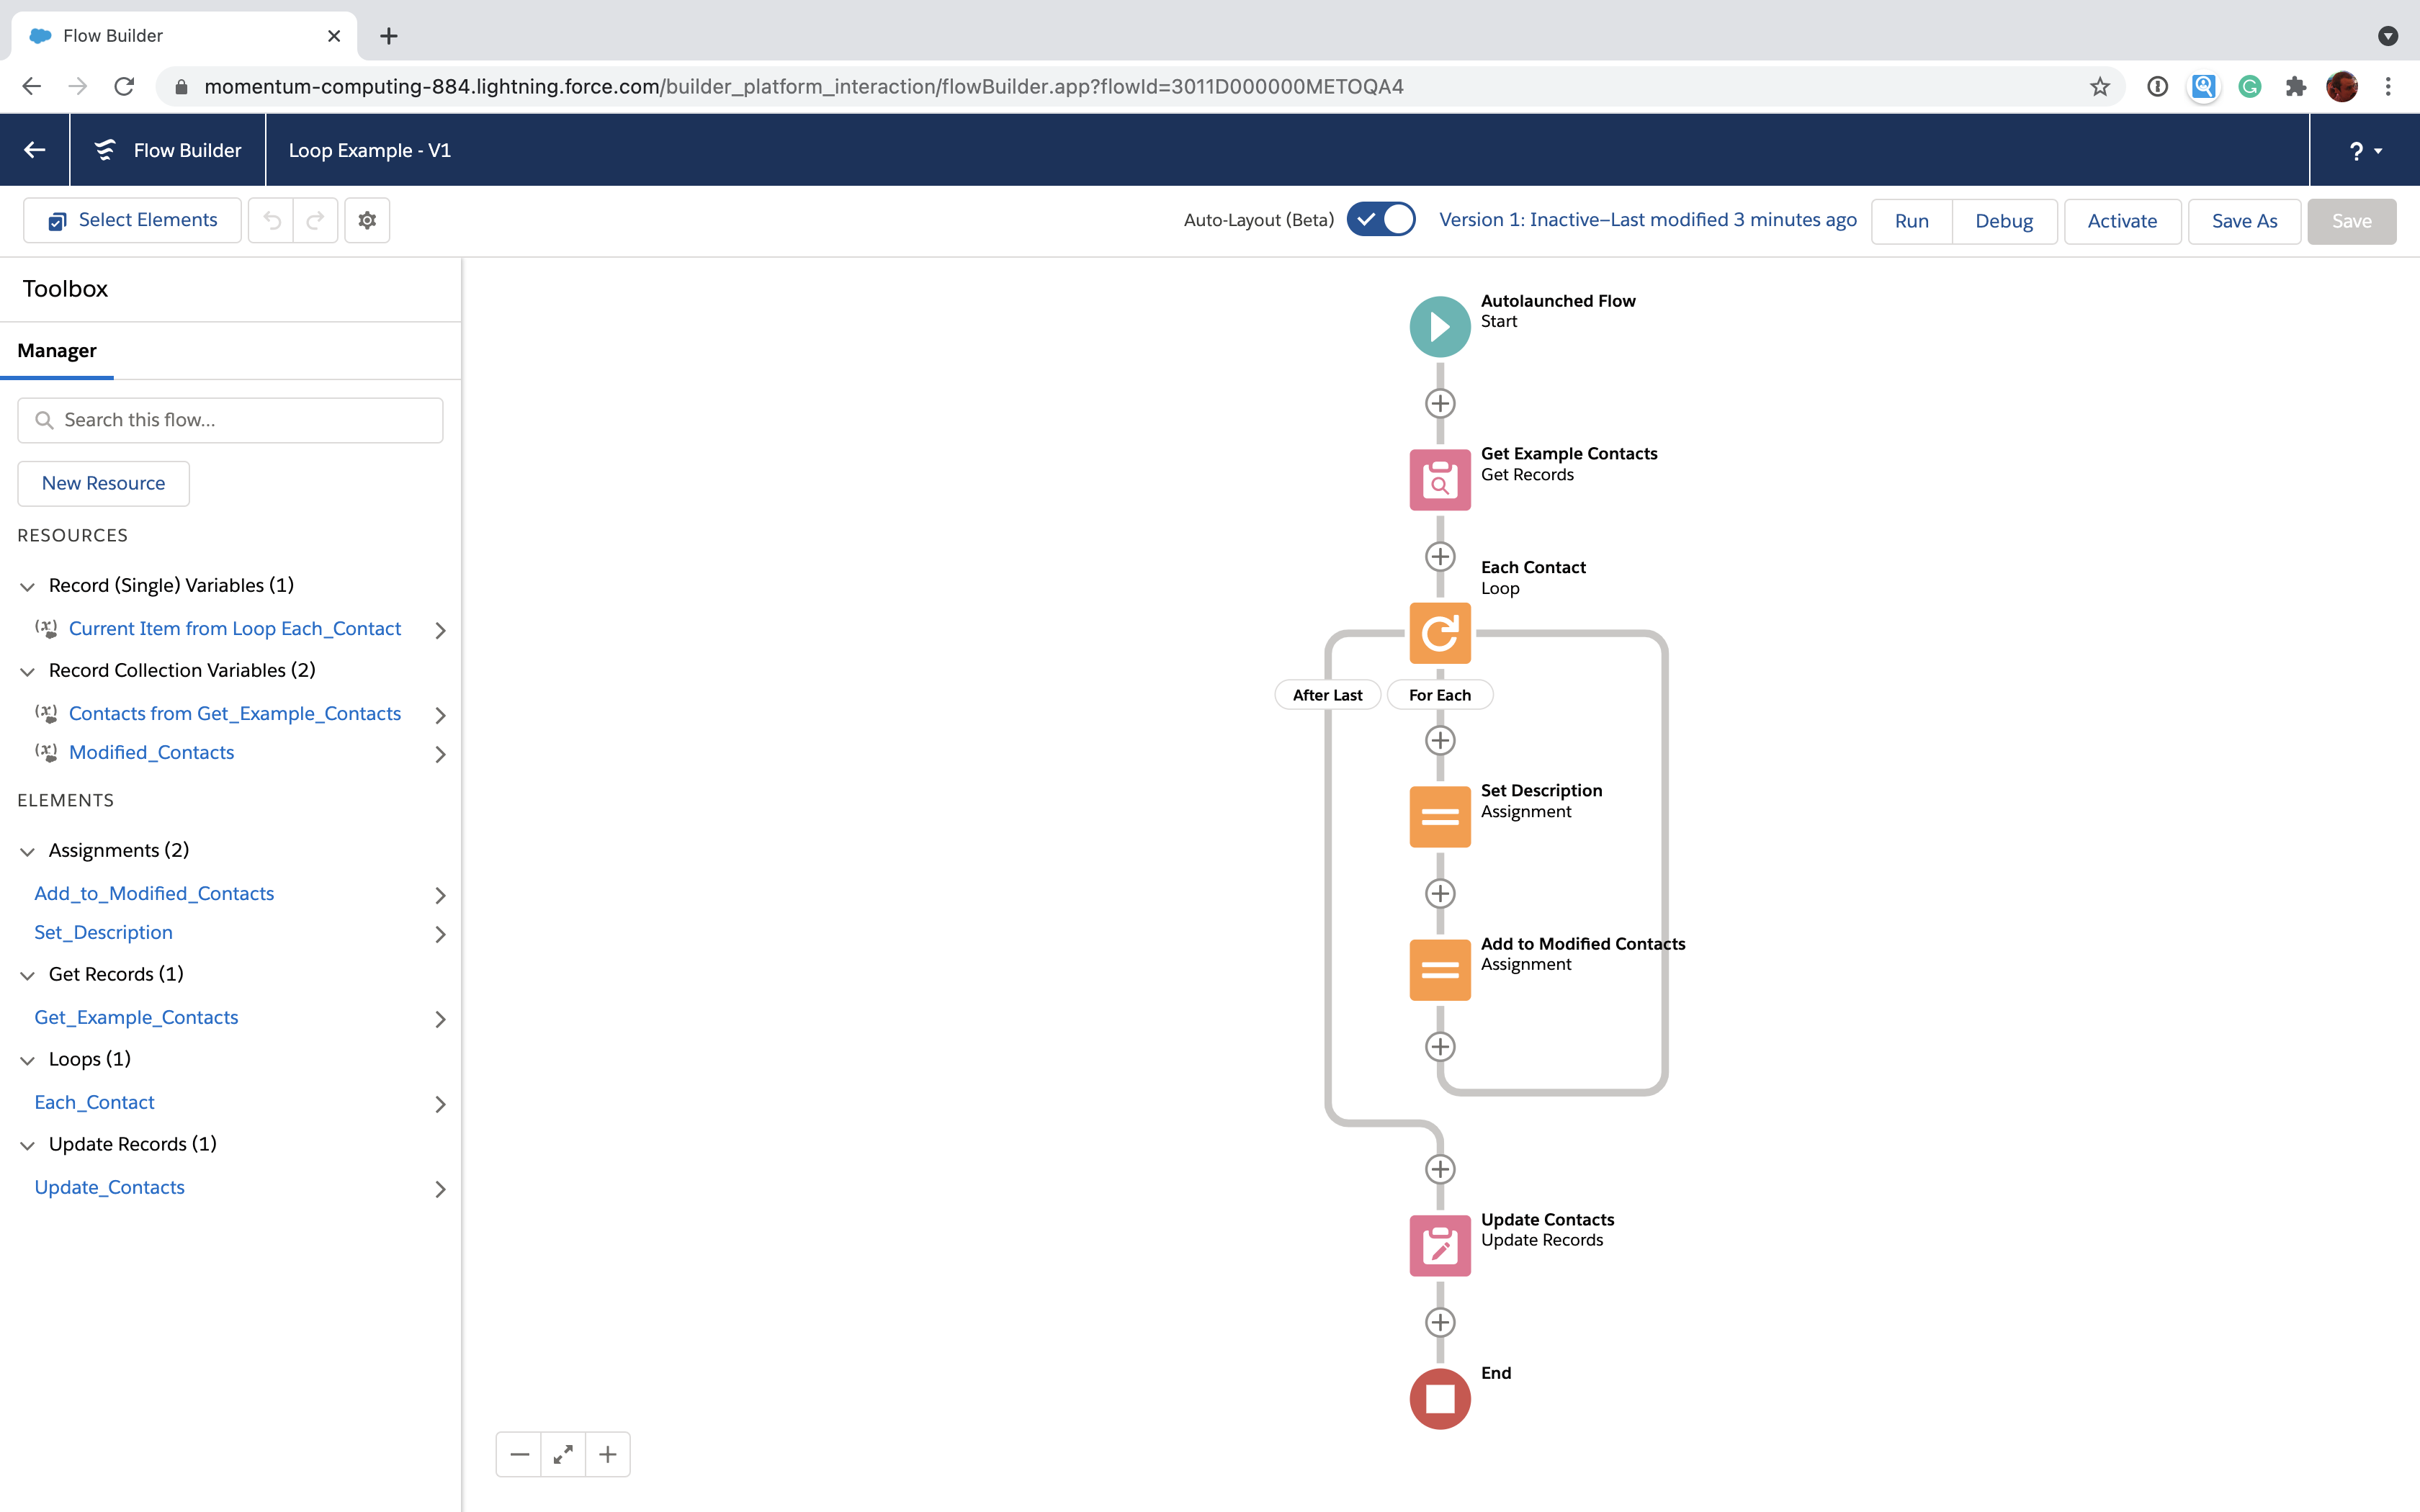 How to use loops in Salesforce Flow